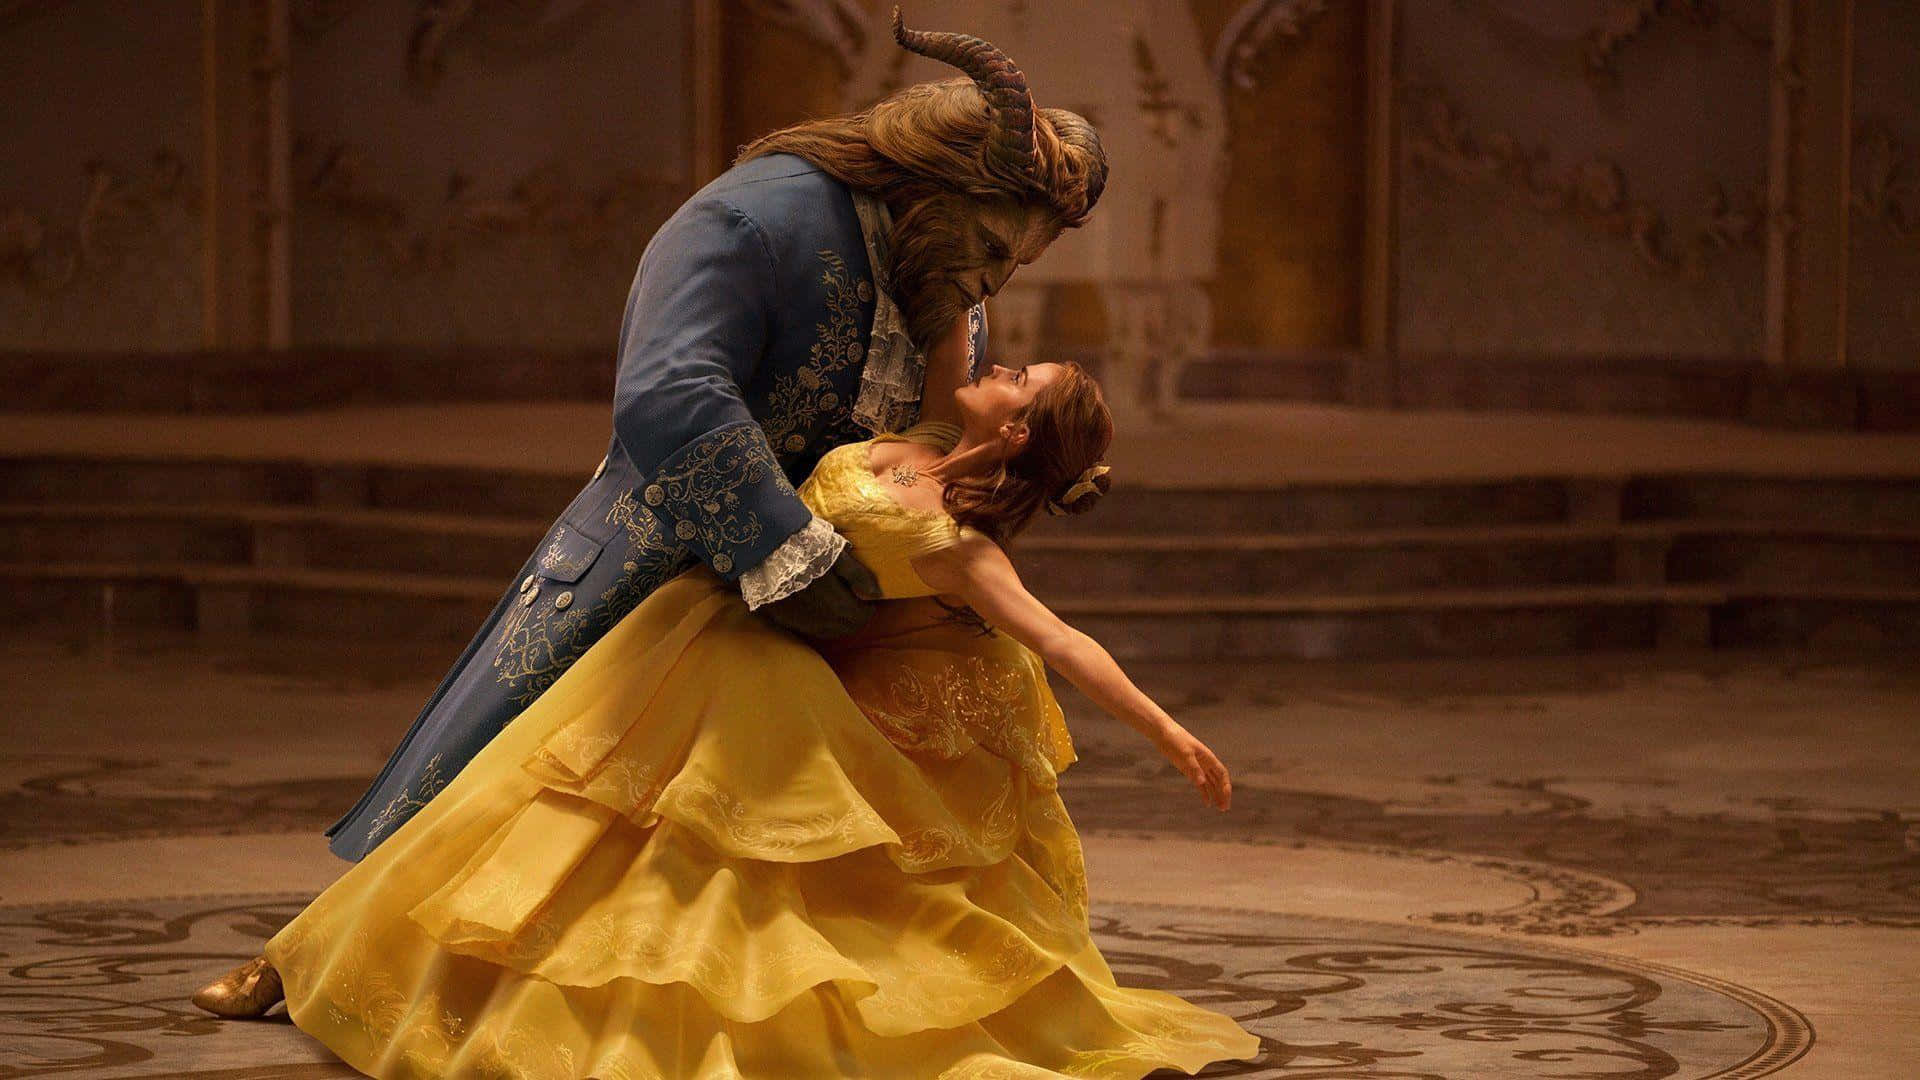 Beauty And The Beast In A Dance Scene